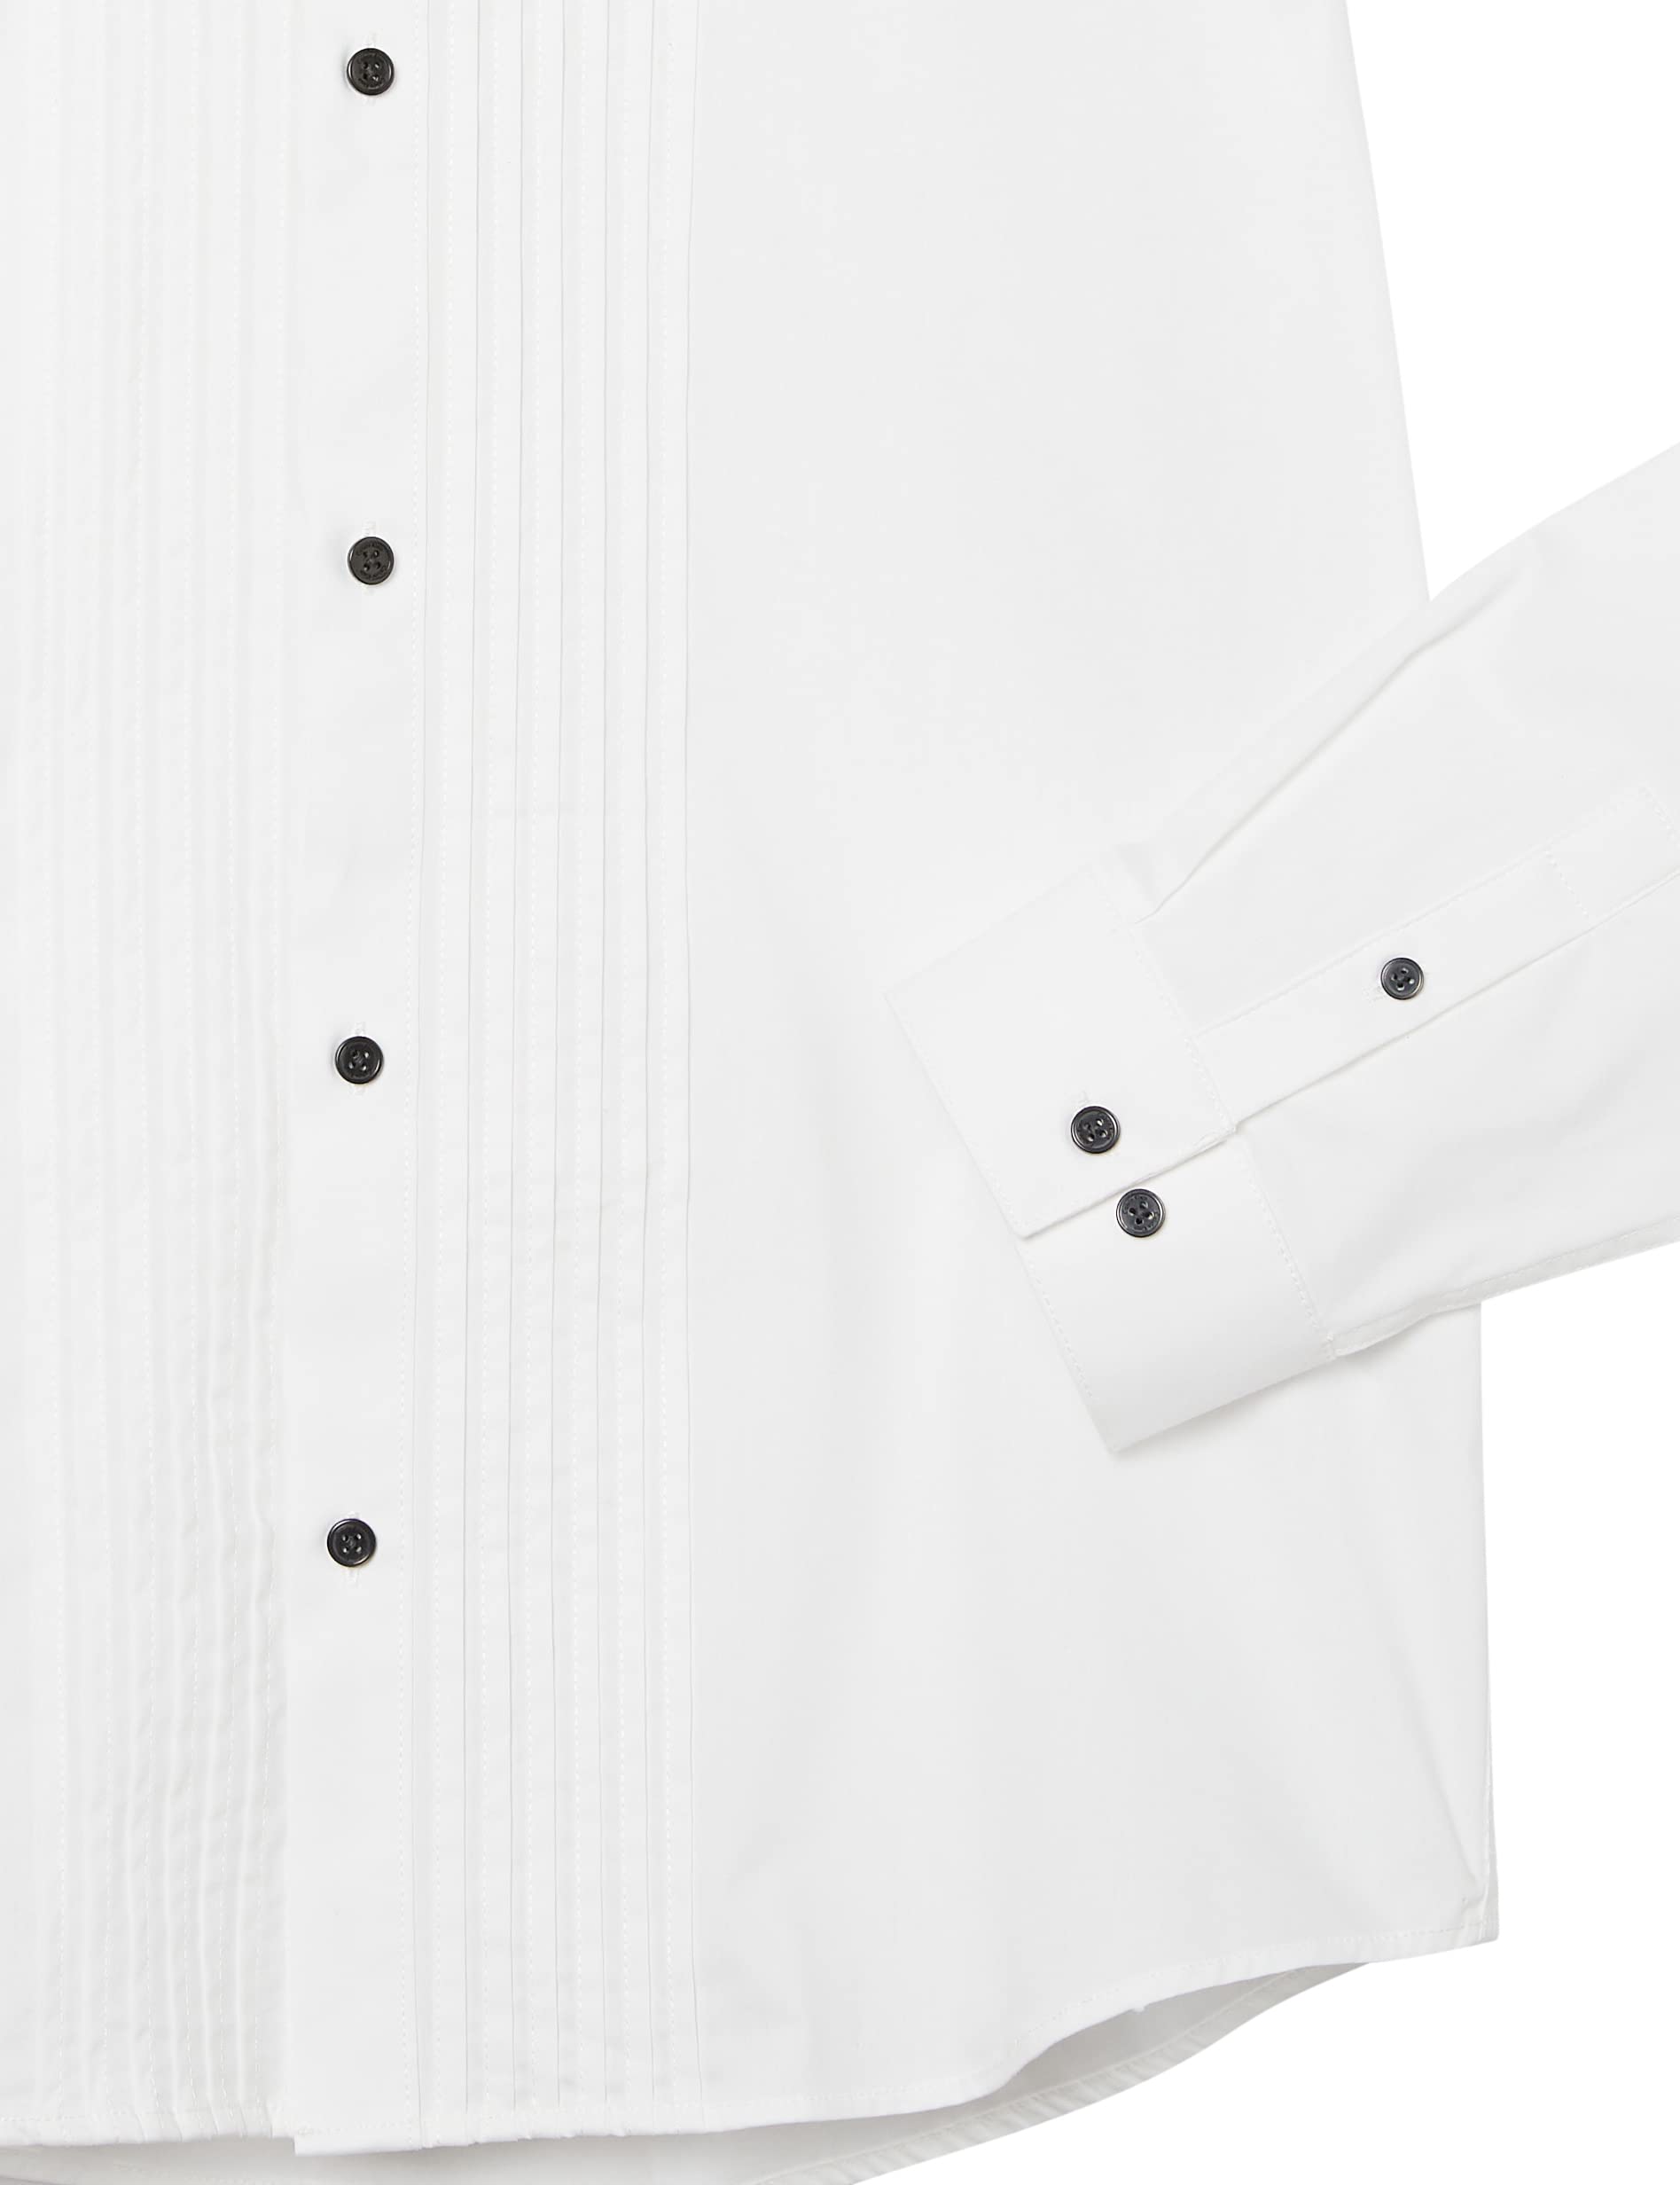 Calvin Klein Boys' Long Sleeve Tuxedo Dress Shirt with Bow Tie, Button-Down Style with Classic Pleated Bib, Matching Hanky